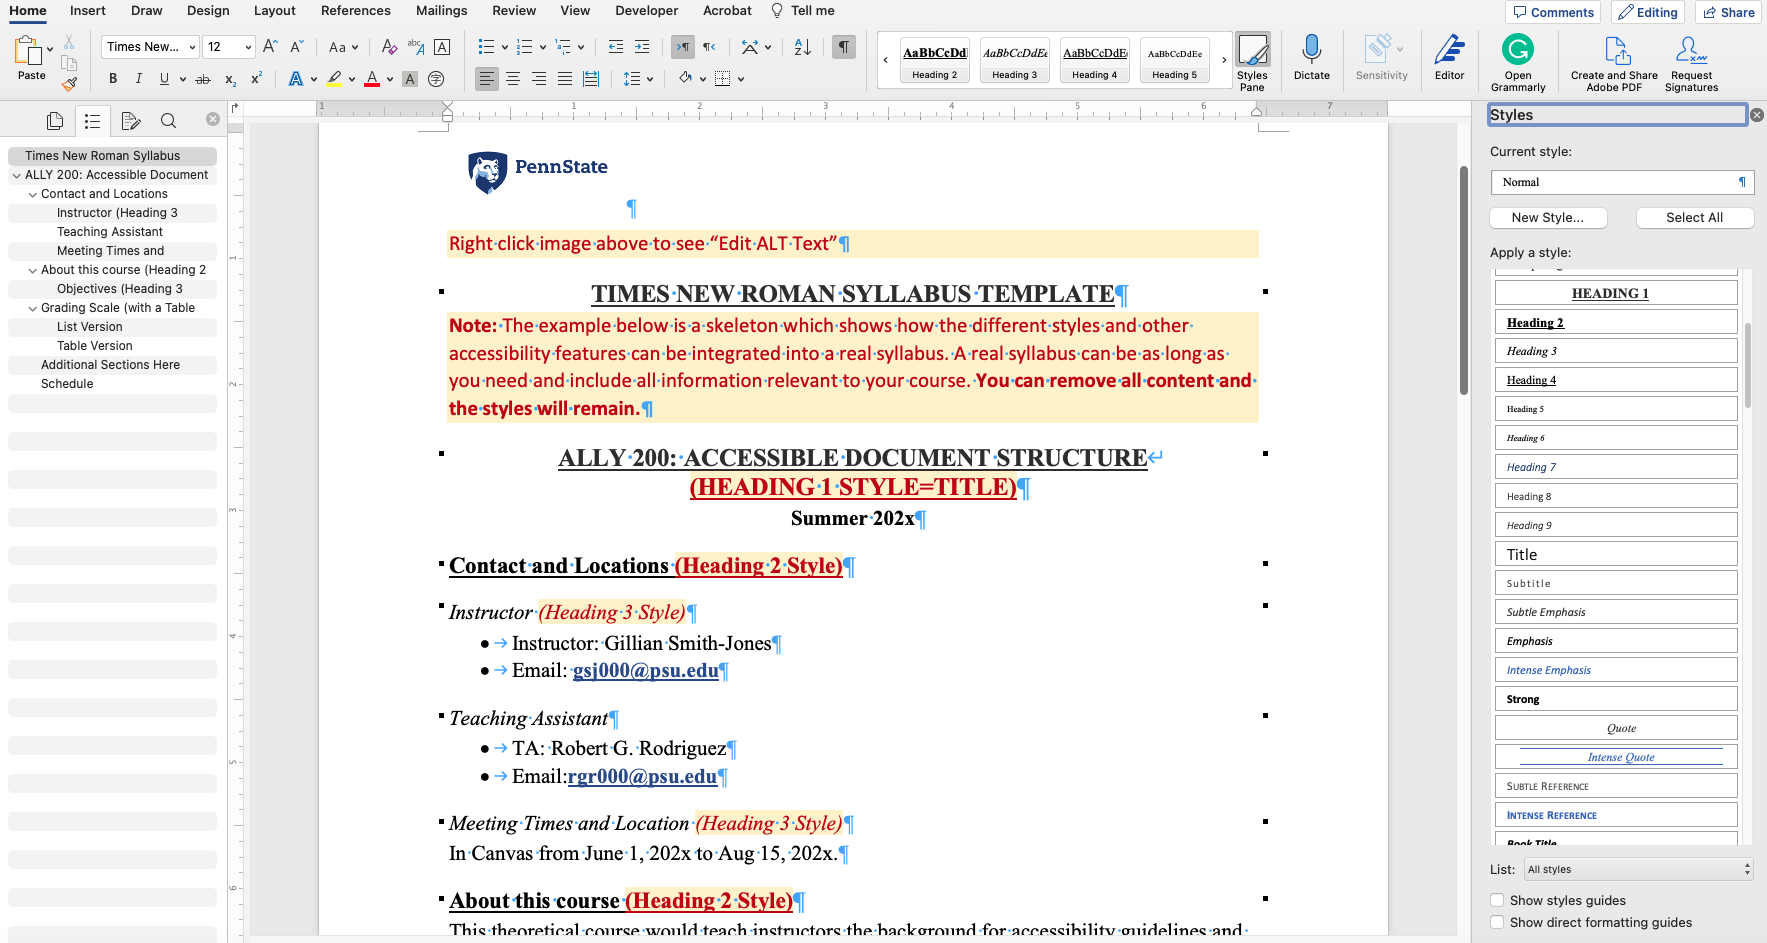 Syllabus file in Word with text in Times New Roman.